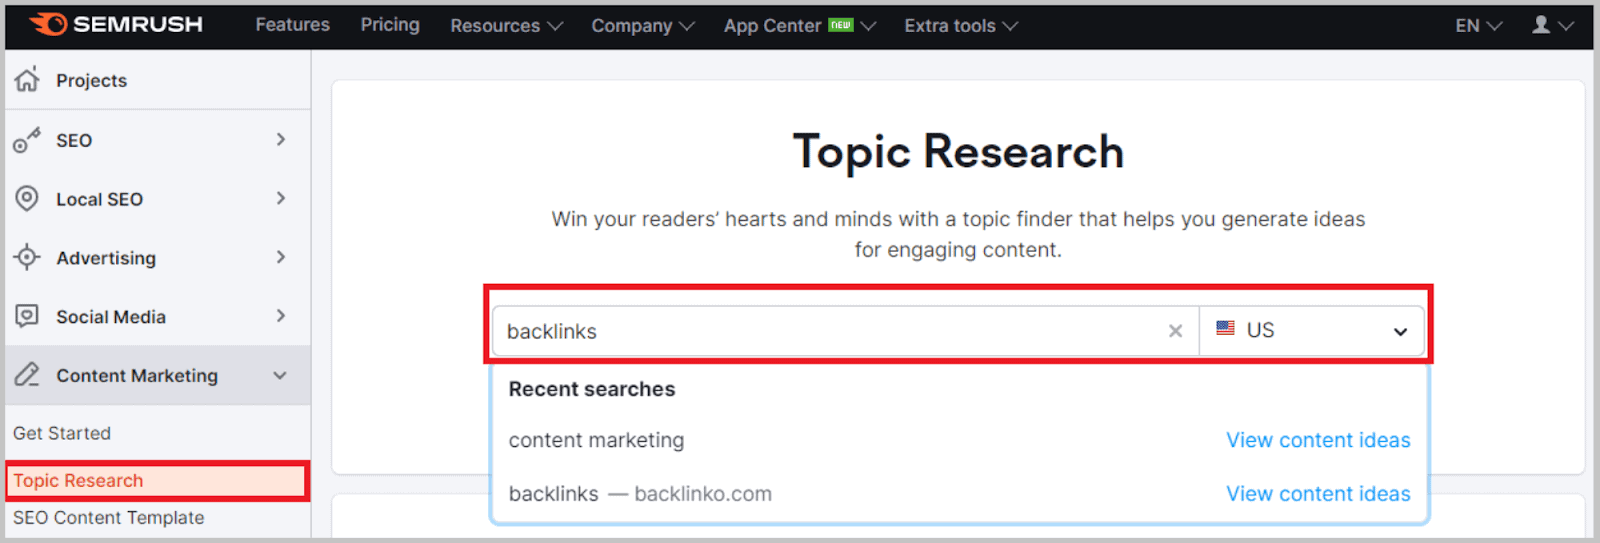 Learn how to use Topic Research Tool on Semrush